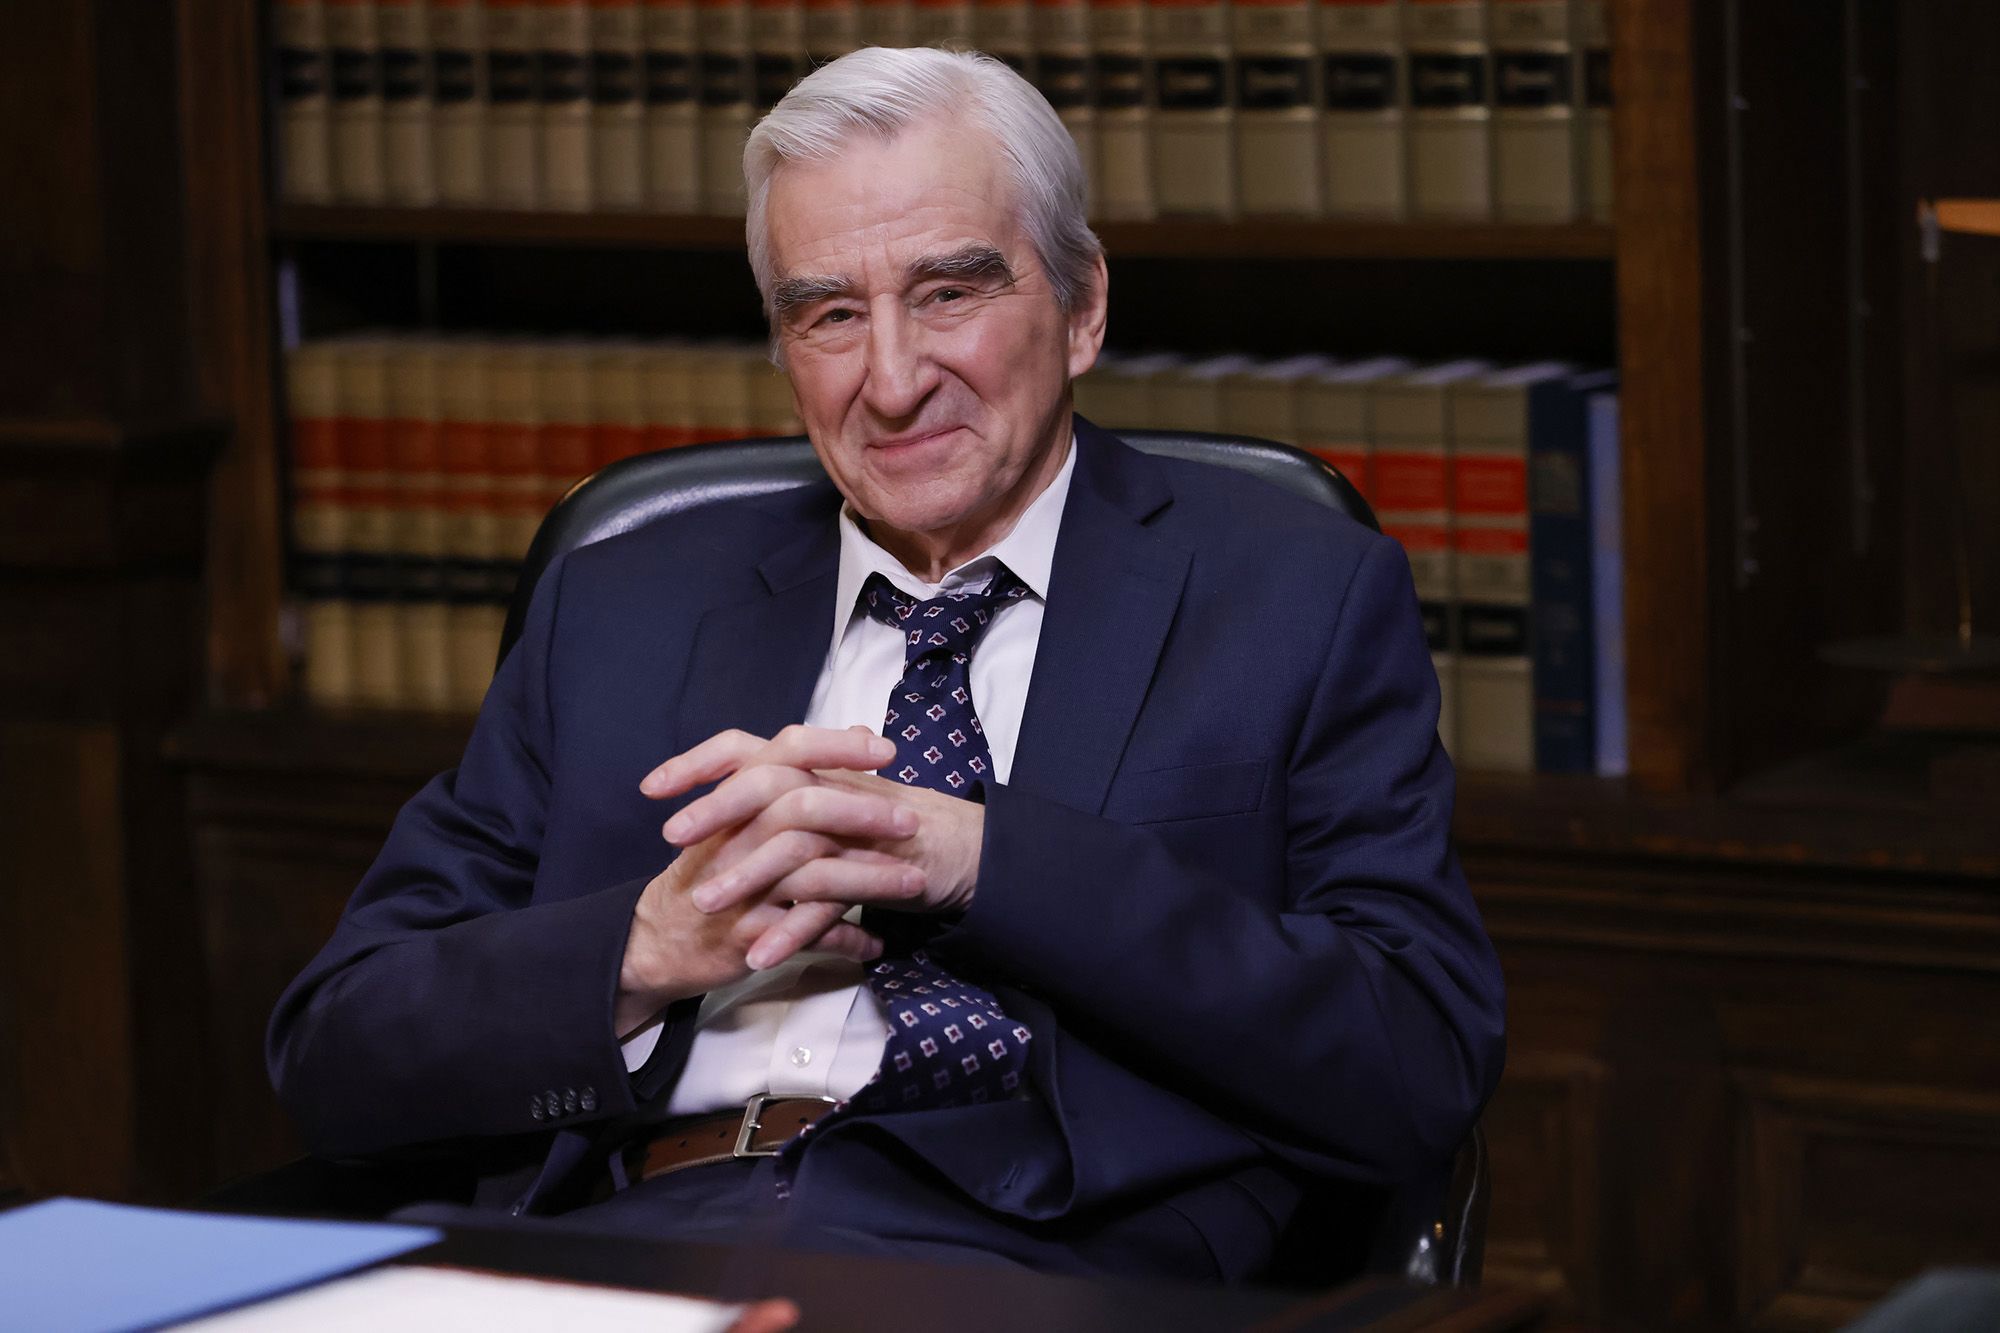 Sam Waterston says goodbye to ‘Law & Order’ after 400 episodes